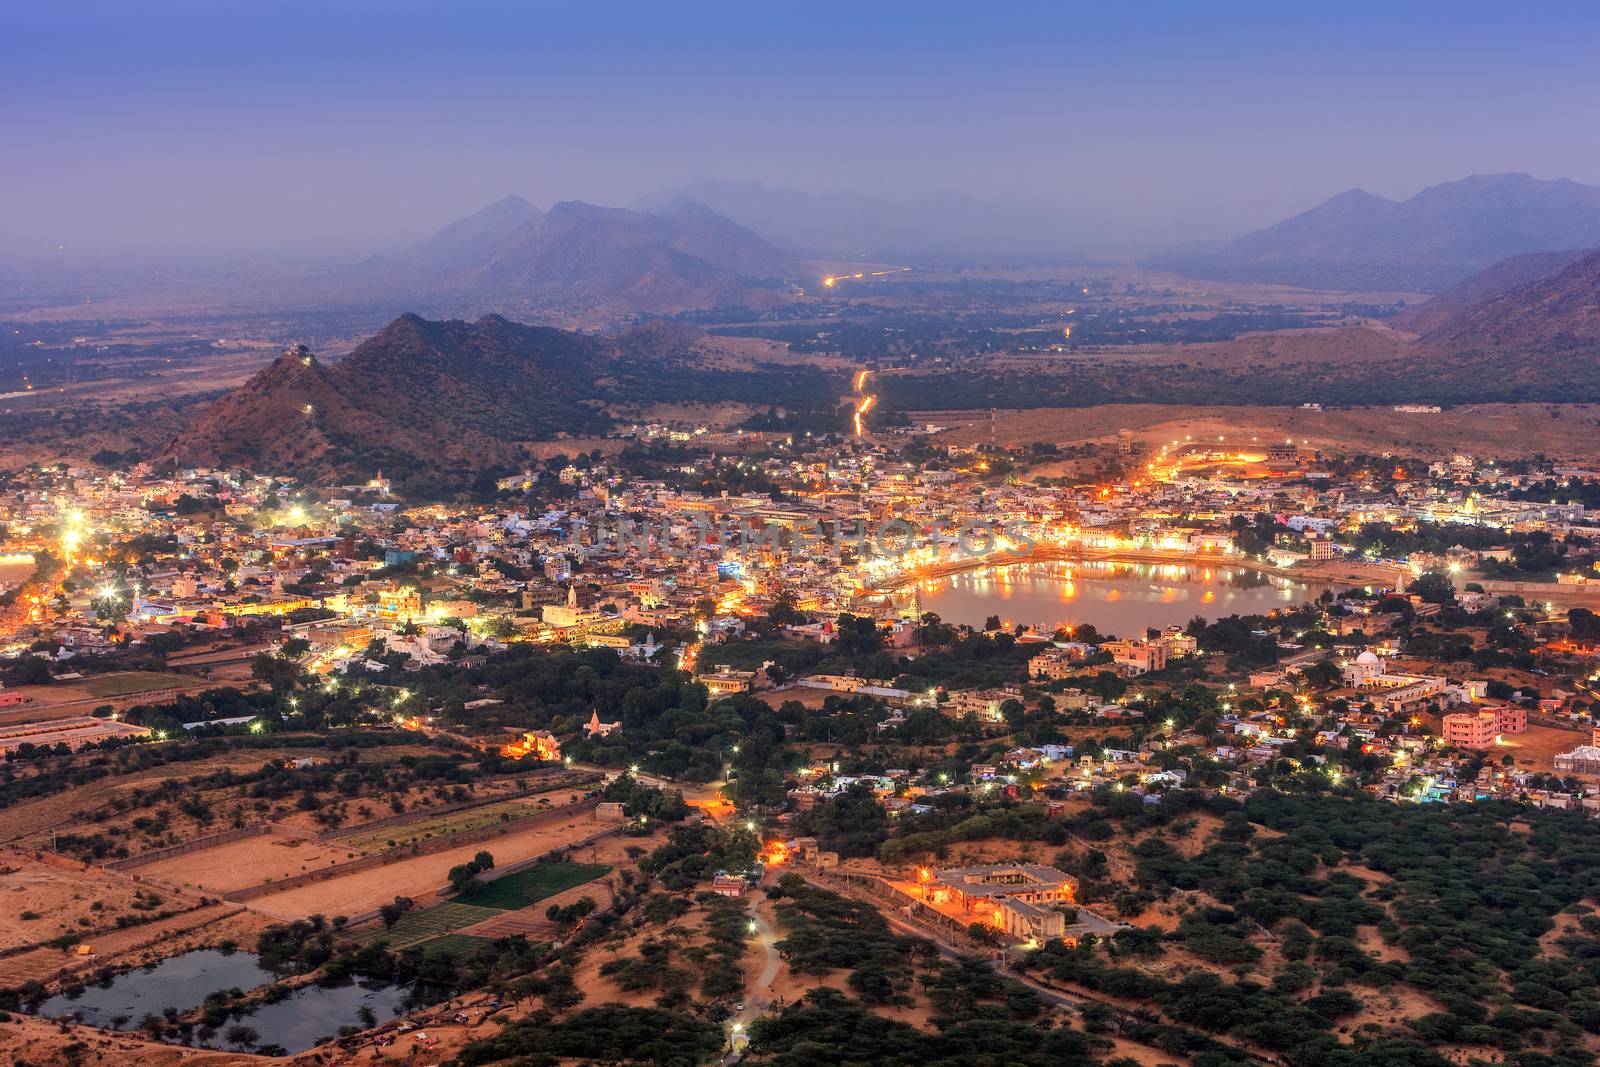 View of the Holy city of Pushkar at night, Rajasthan, India, Asia